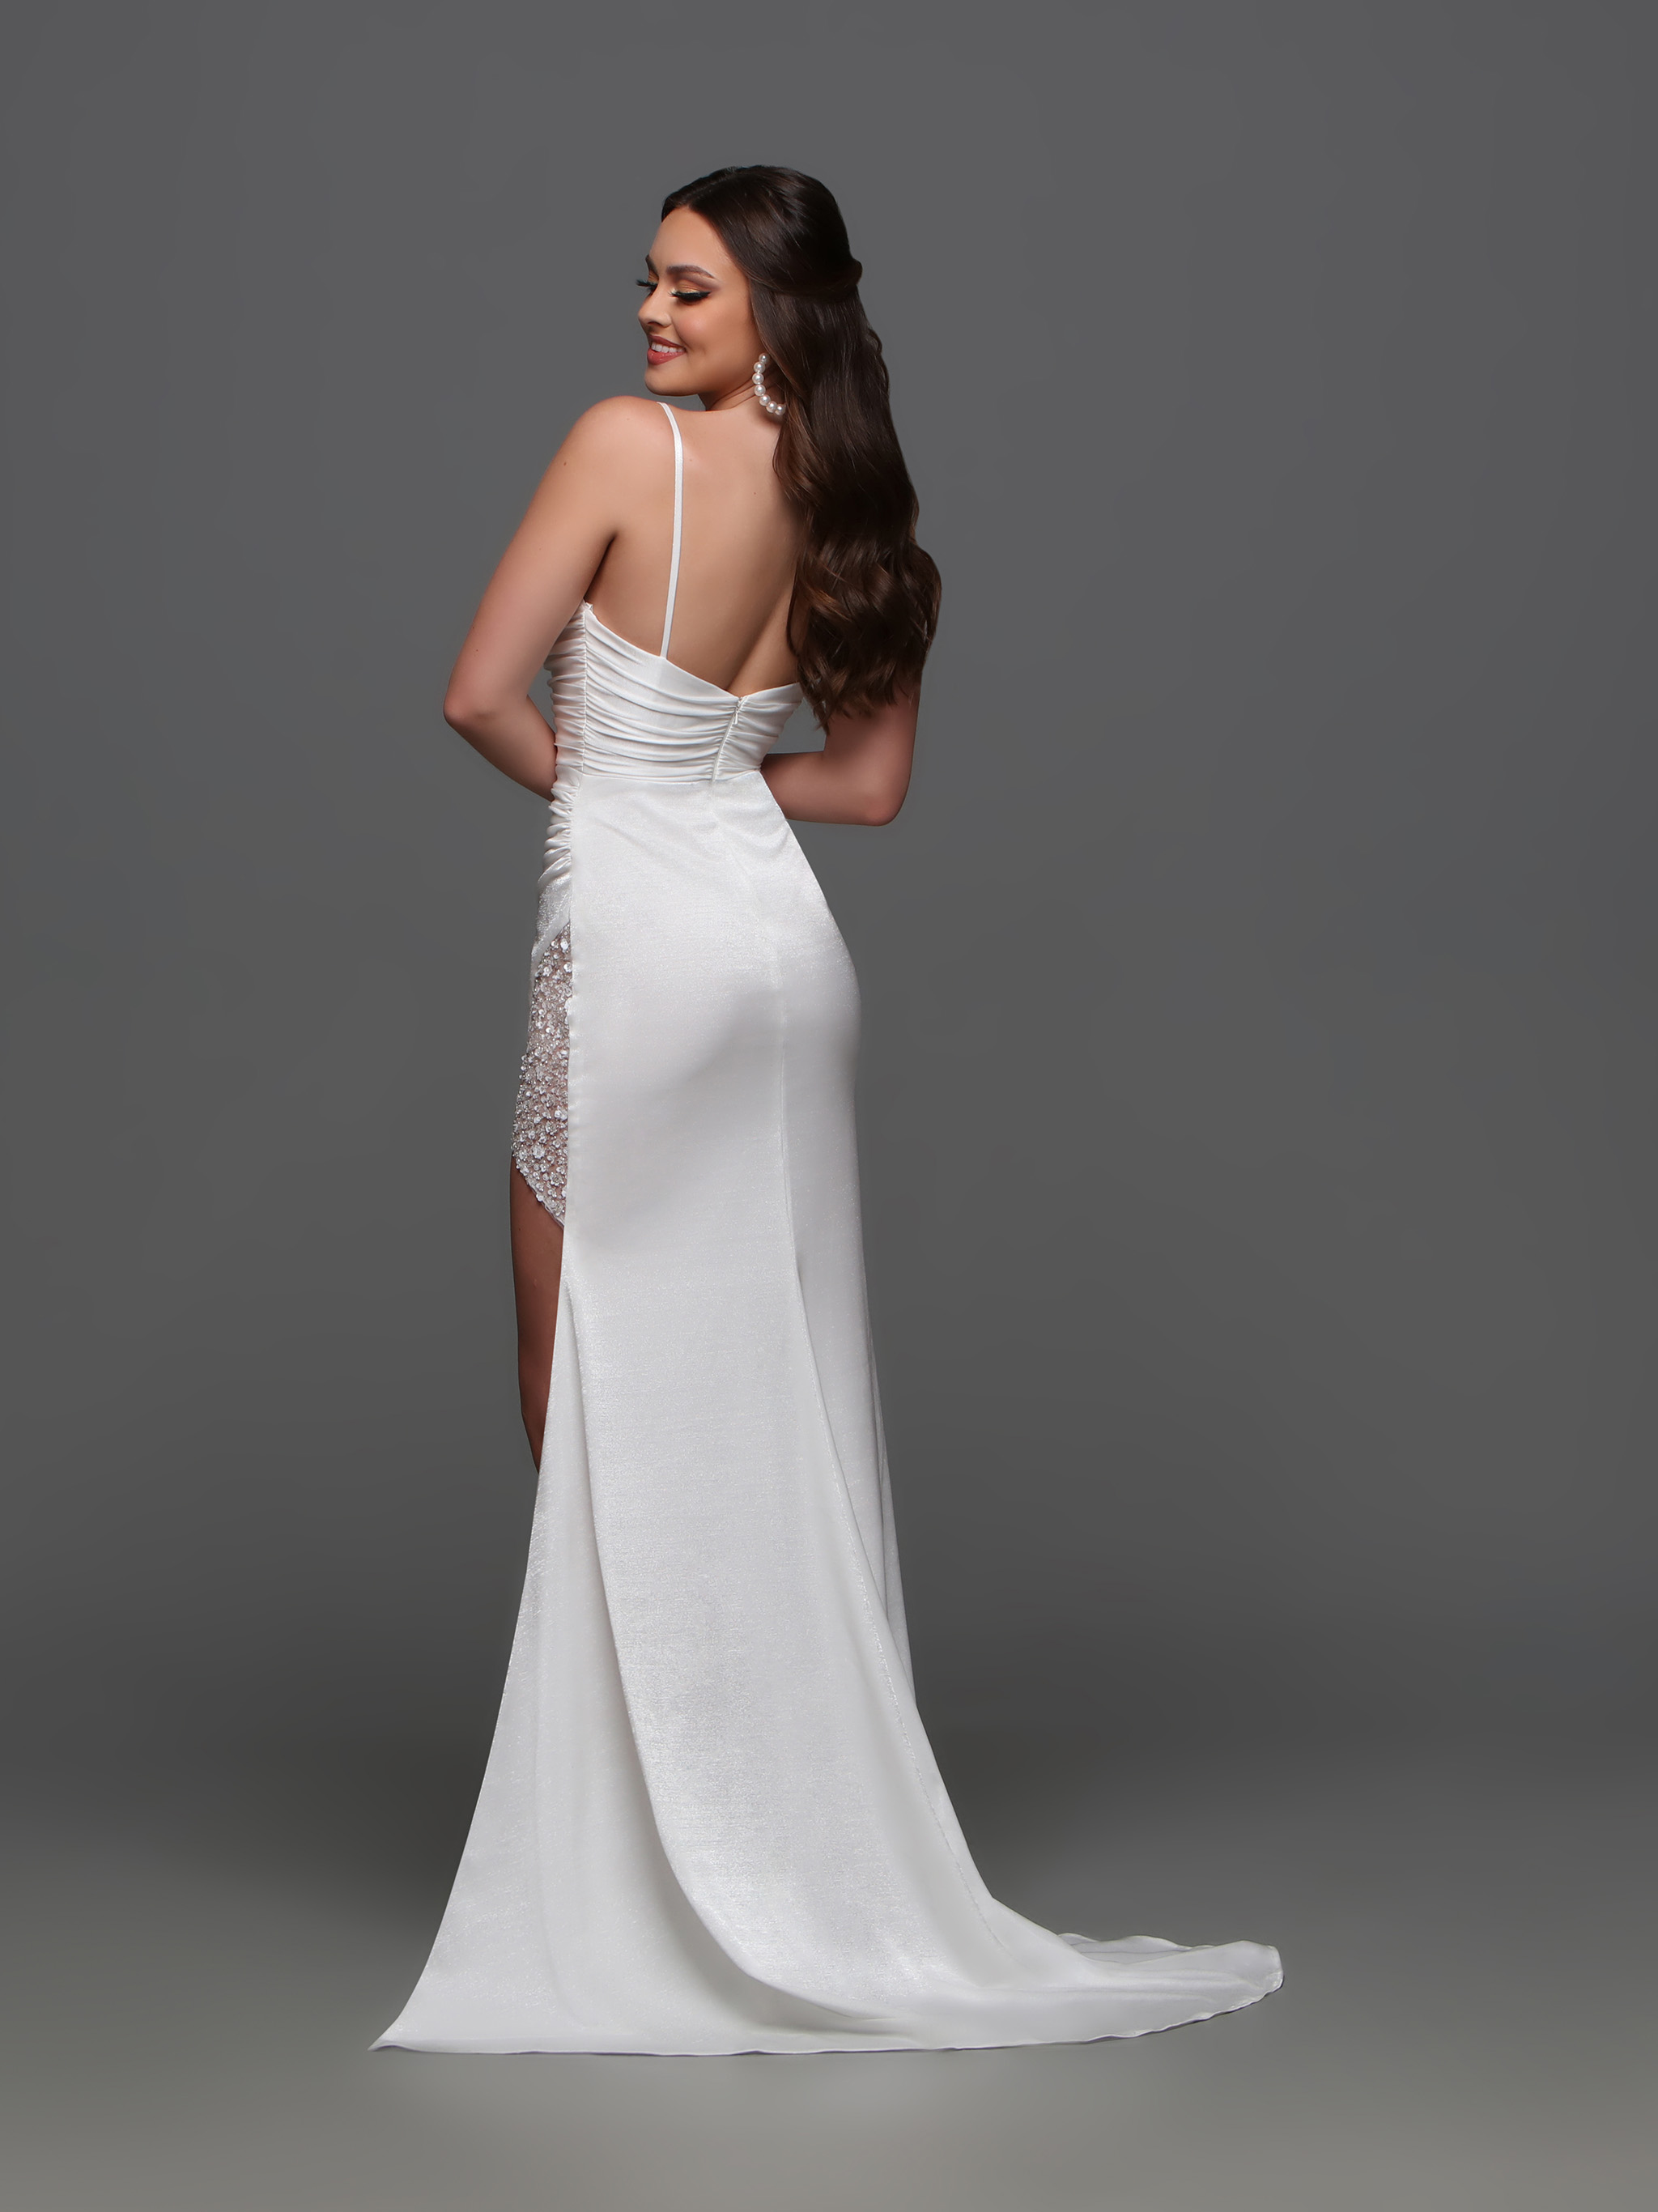 Image showing back view of style #72395